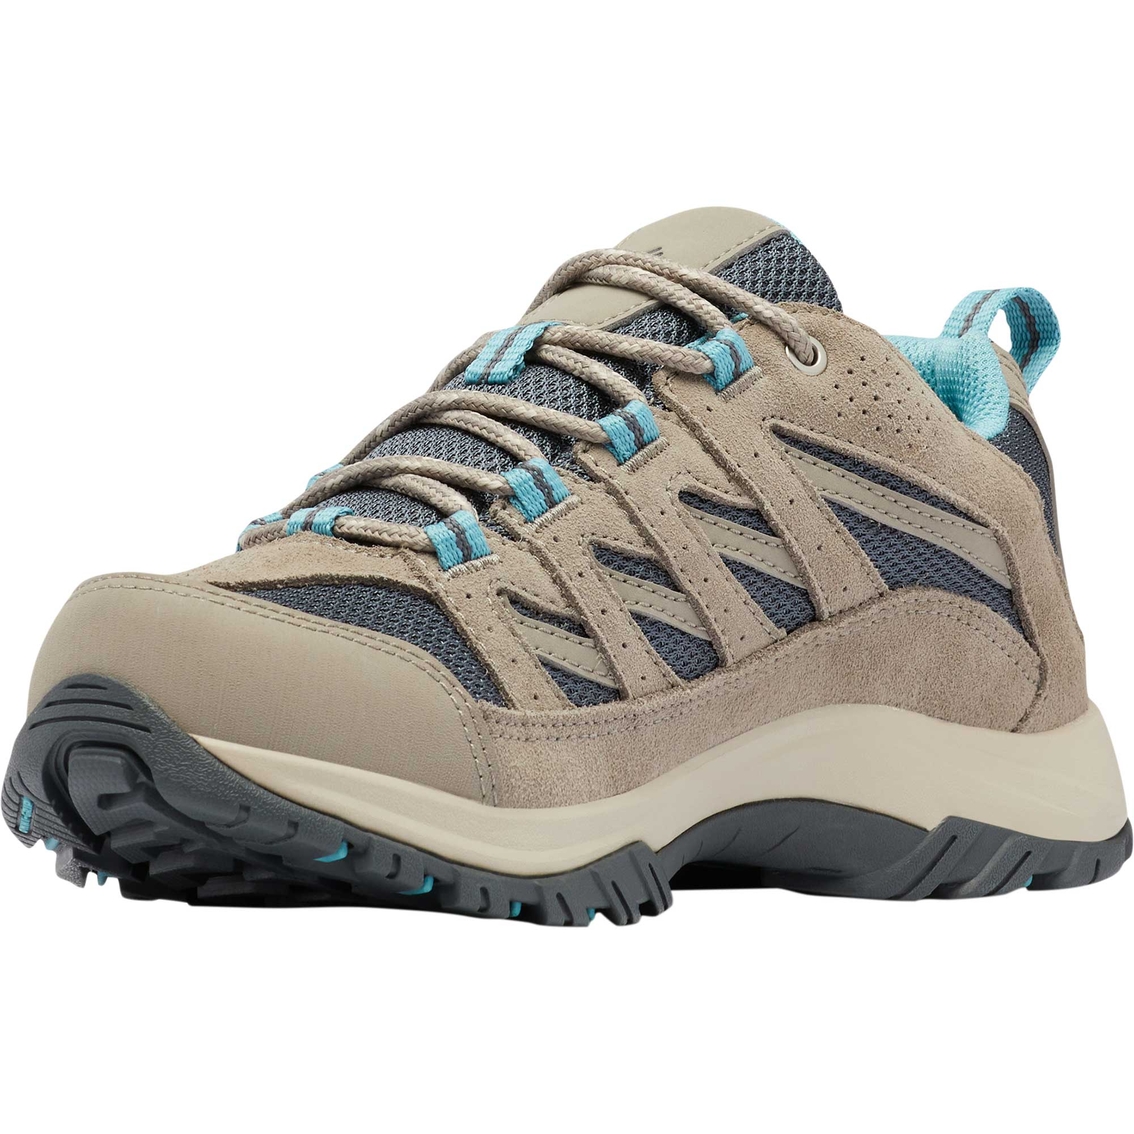 Columbia Women's Crestwood Hiking Boots | Boots | Shoes | Shop The Exchange